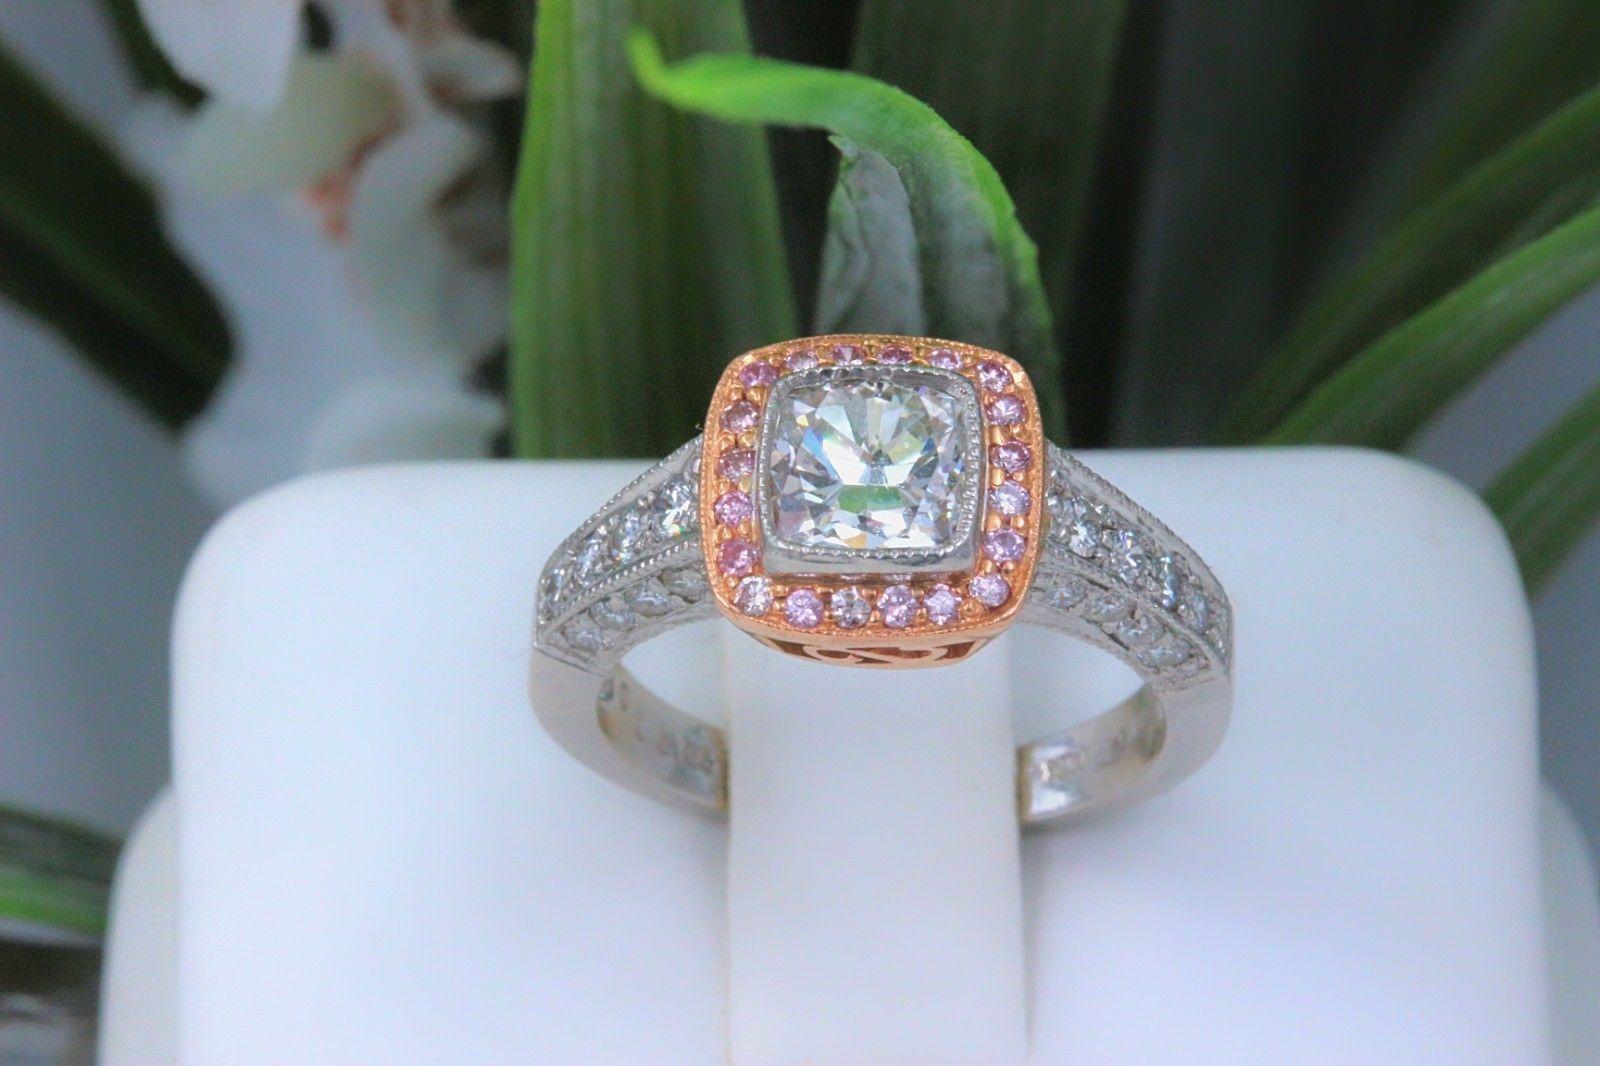 Rose Gold & Platinum Diamond Engagement Ring
Style:  Halo
Metal:  Platinum and 14k Rose Gold 
Size:  6.25 - sizable
Total Carat Weight:  1.50 tcw
Diamond Shape:  Cushion Cut Approximately 1.00 cts
Diamond Color & Clarity: I SI1
Accent Diamonds:  24